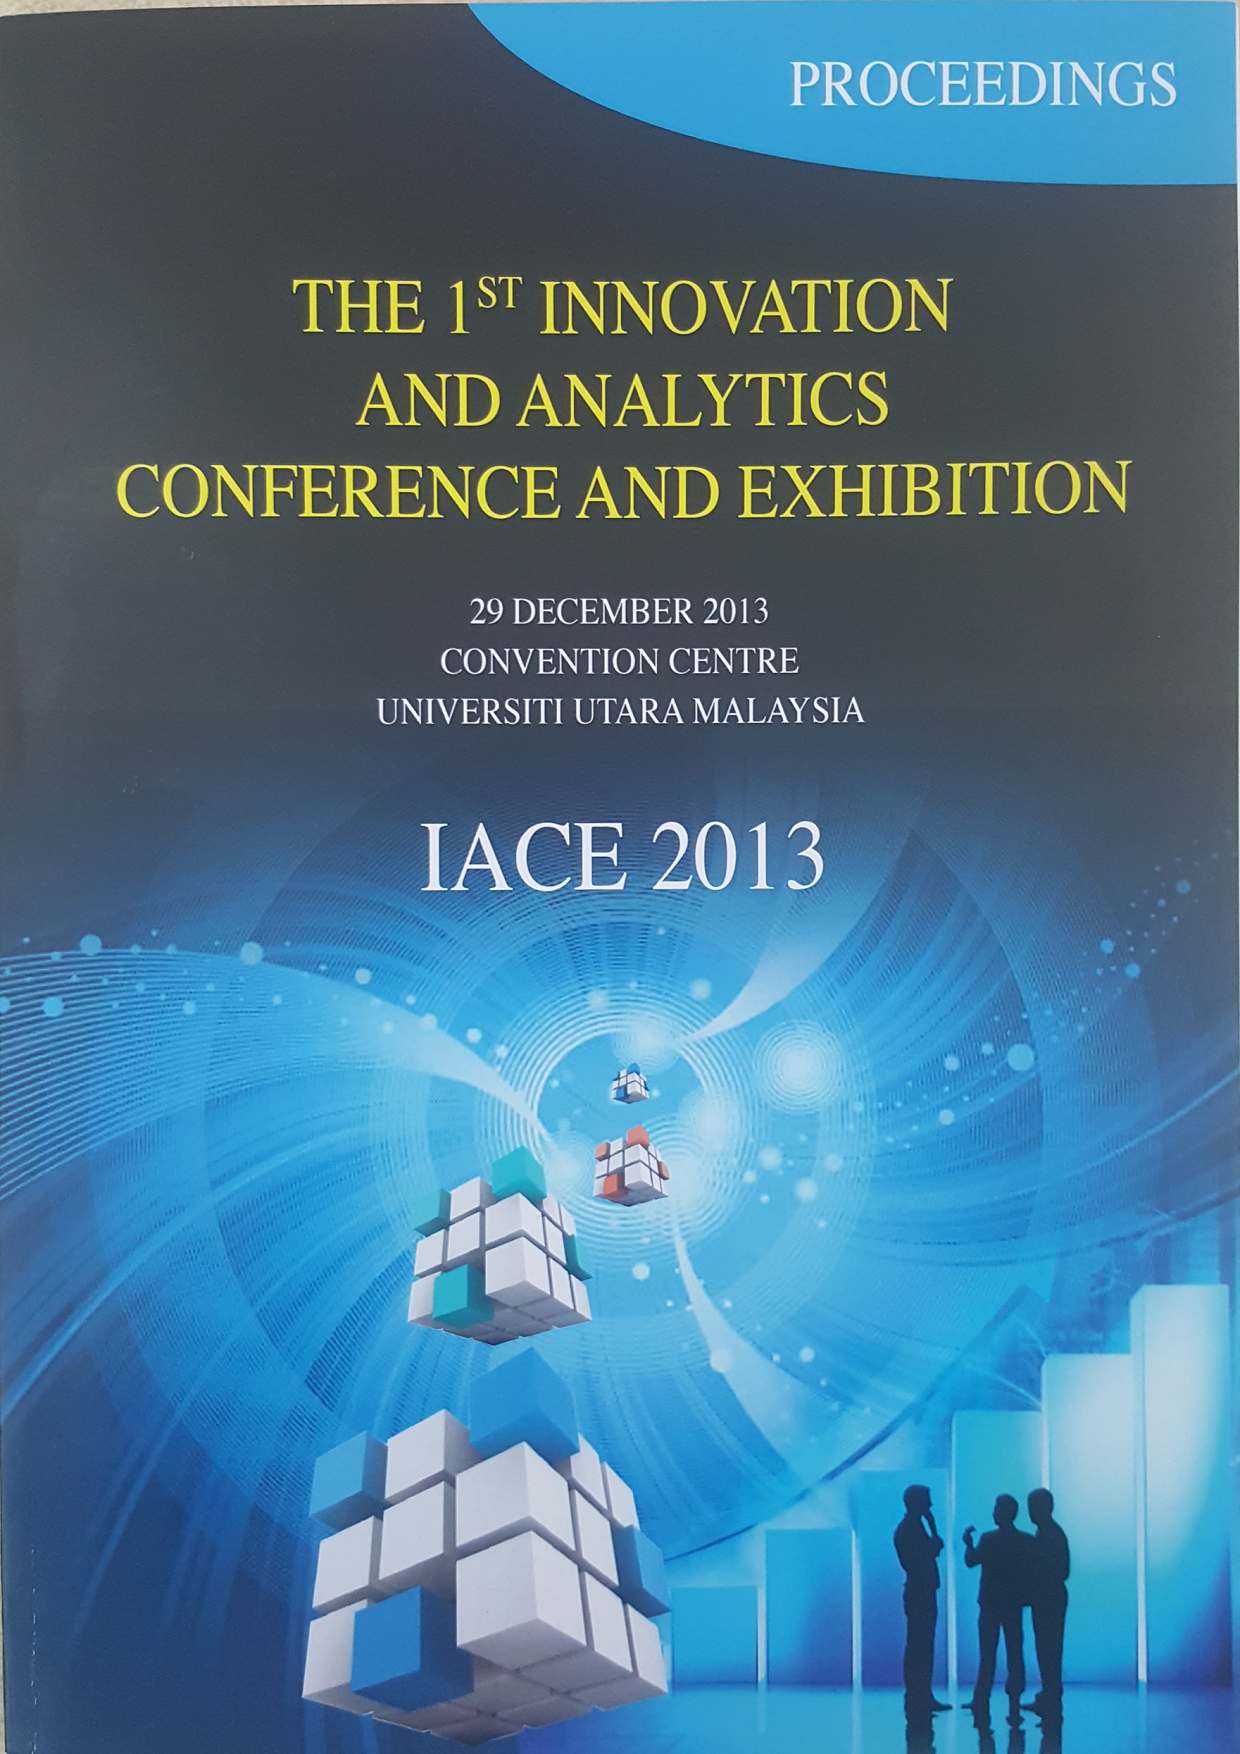 Proceedings of the Innovation and Analytics Conference & Exhibition (IACE) 2013